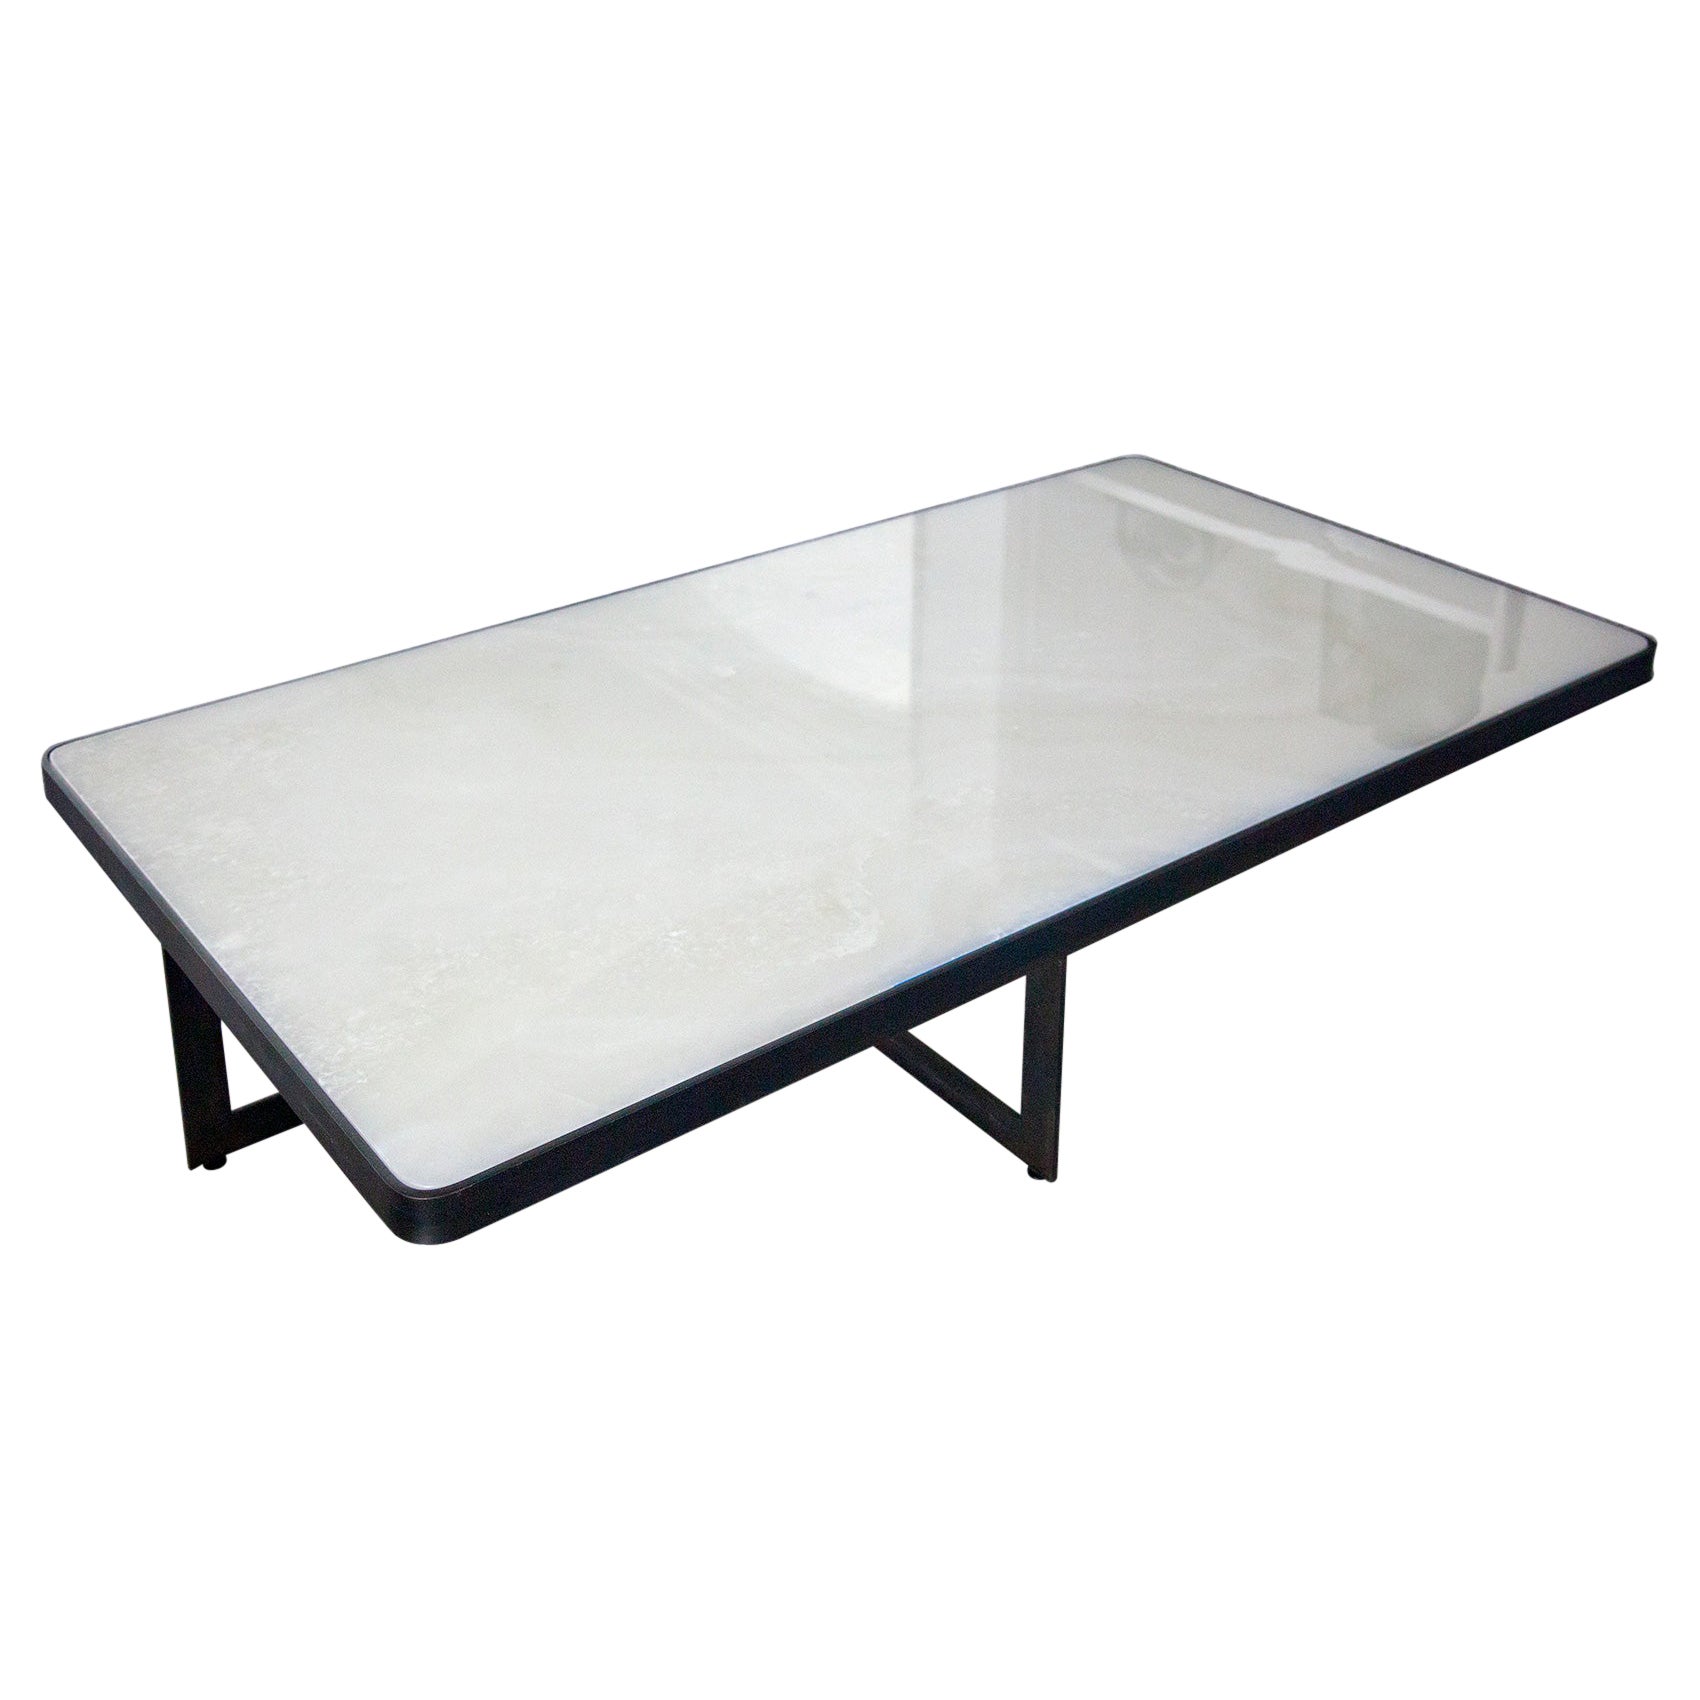 White Quartzite Coffee Table with Blackened Steel Cross Base